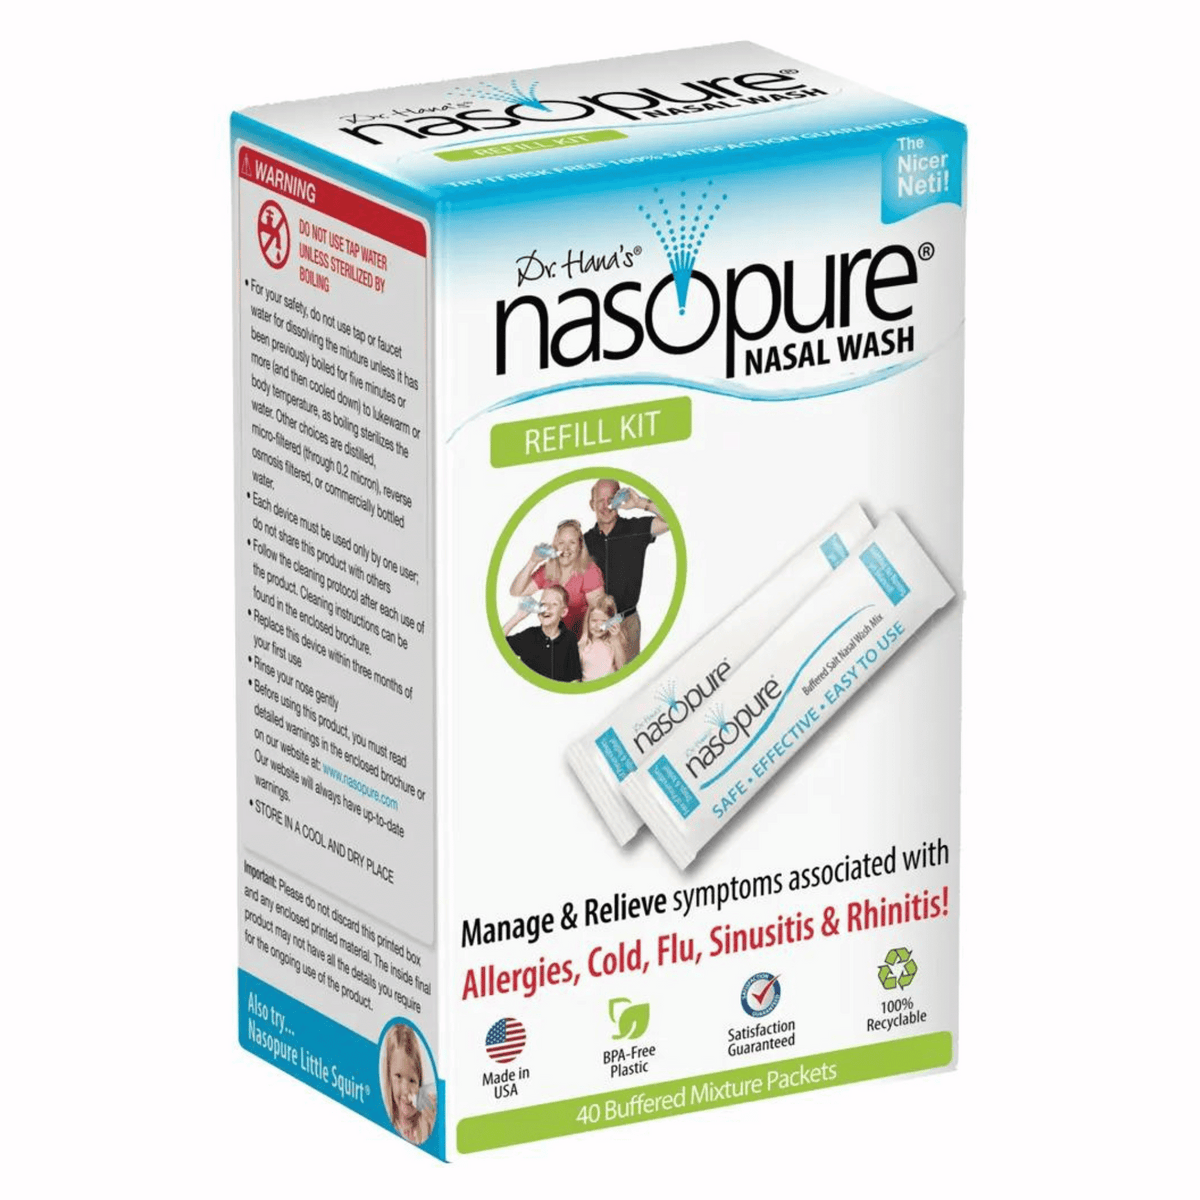 Primary Image of Nasopure Refill Kit